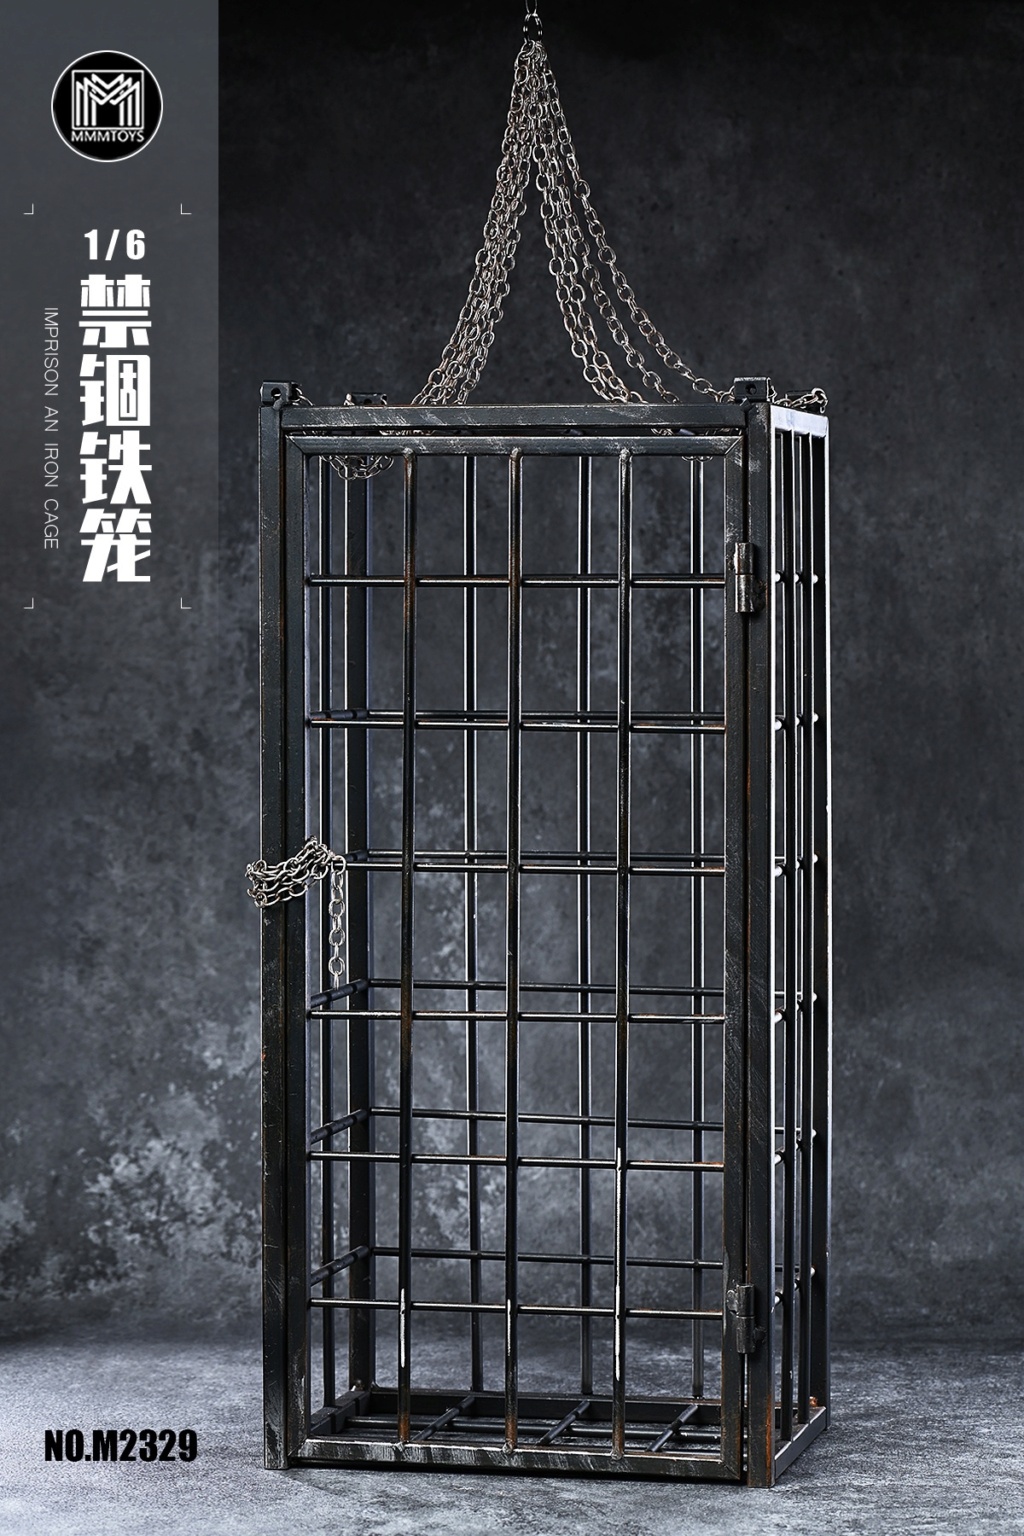 MMMTOYS - NEW PRODUCT: MMMToys: 1/6 Imprisoned iron cage M2329  15304412